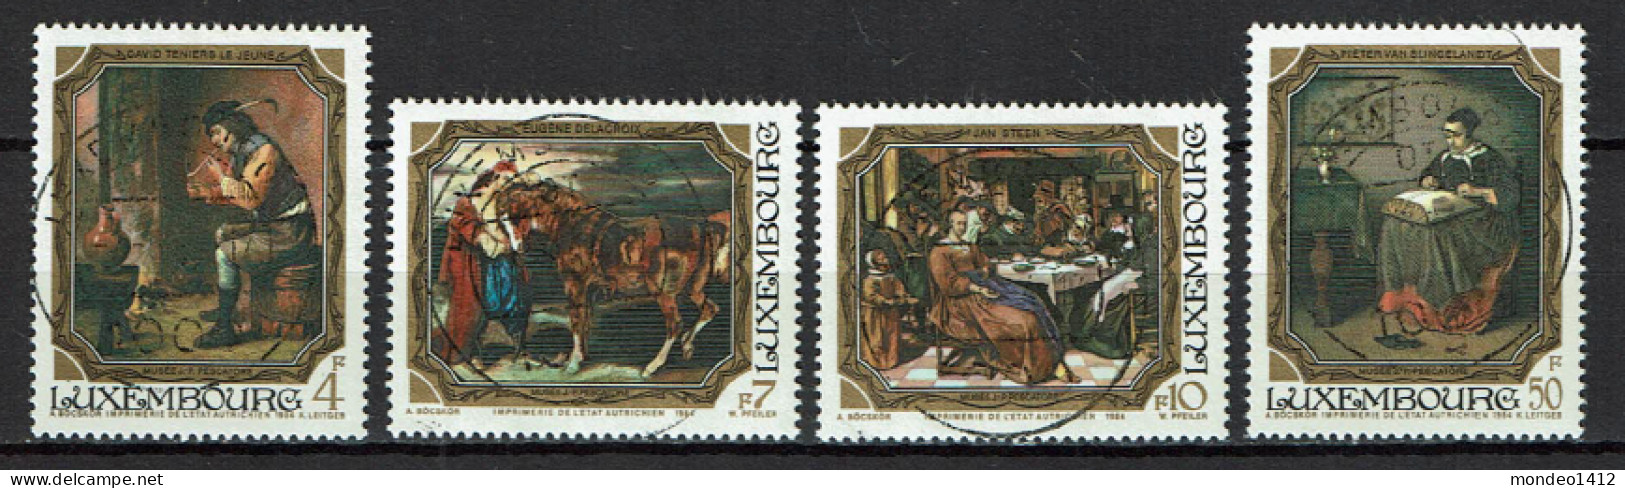 Luxembourg 1984 - YT 1050/1063 - Paintings From Pescatore Museum, Peinture, Tableaux - Used Stamps